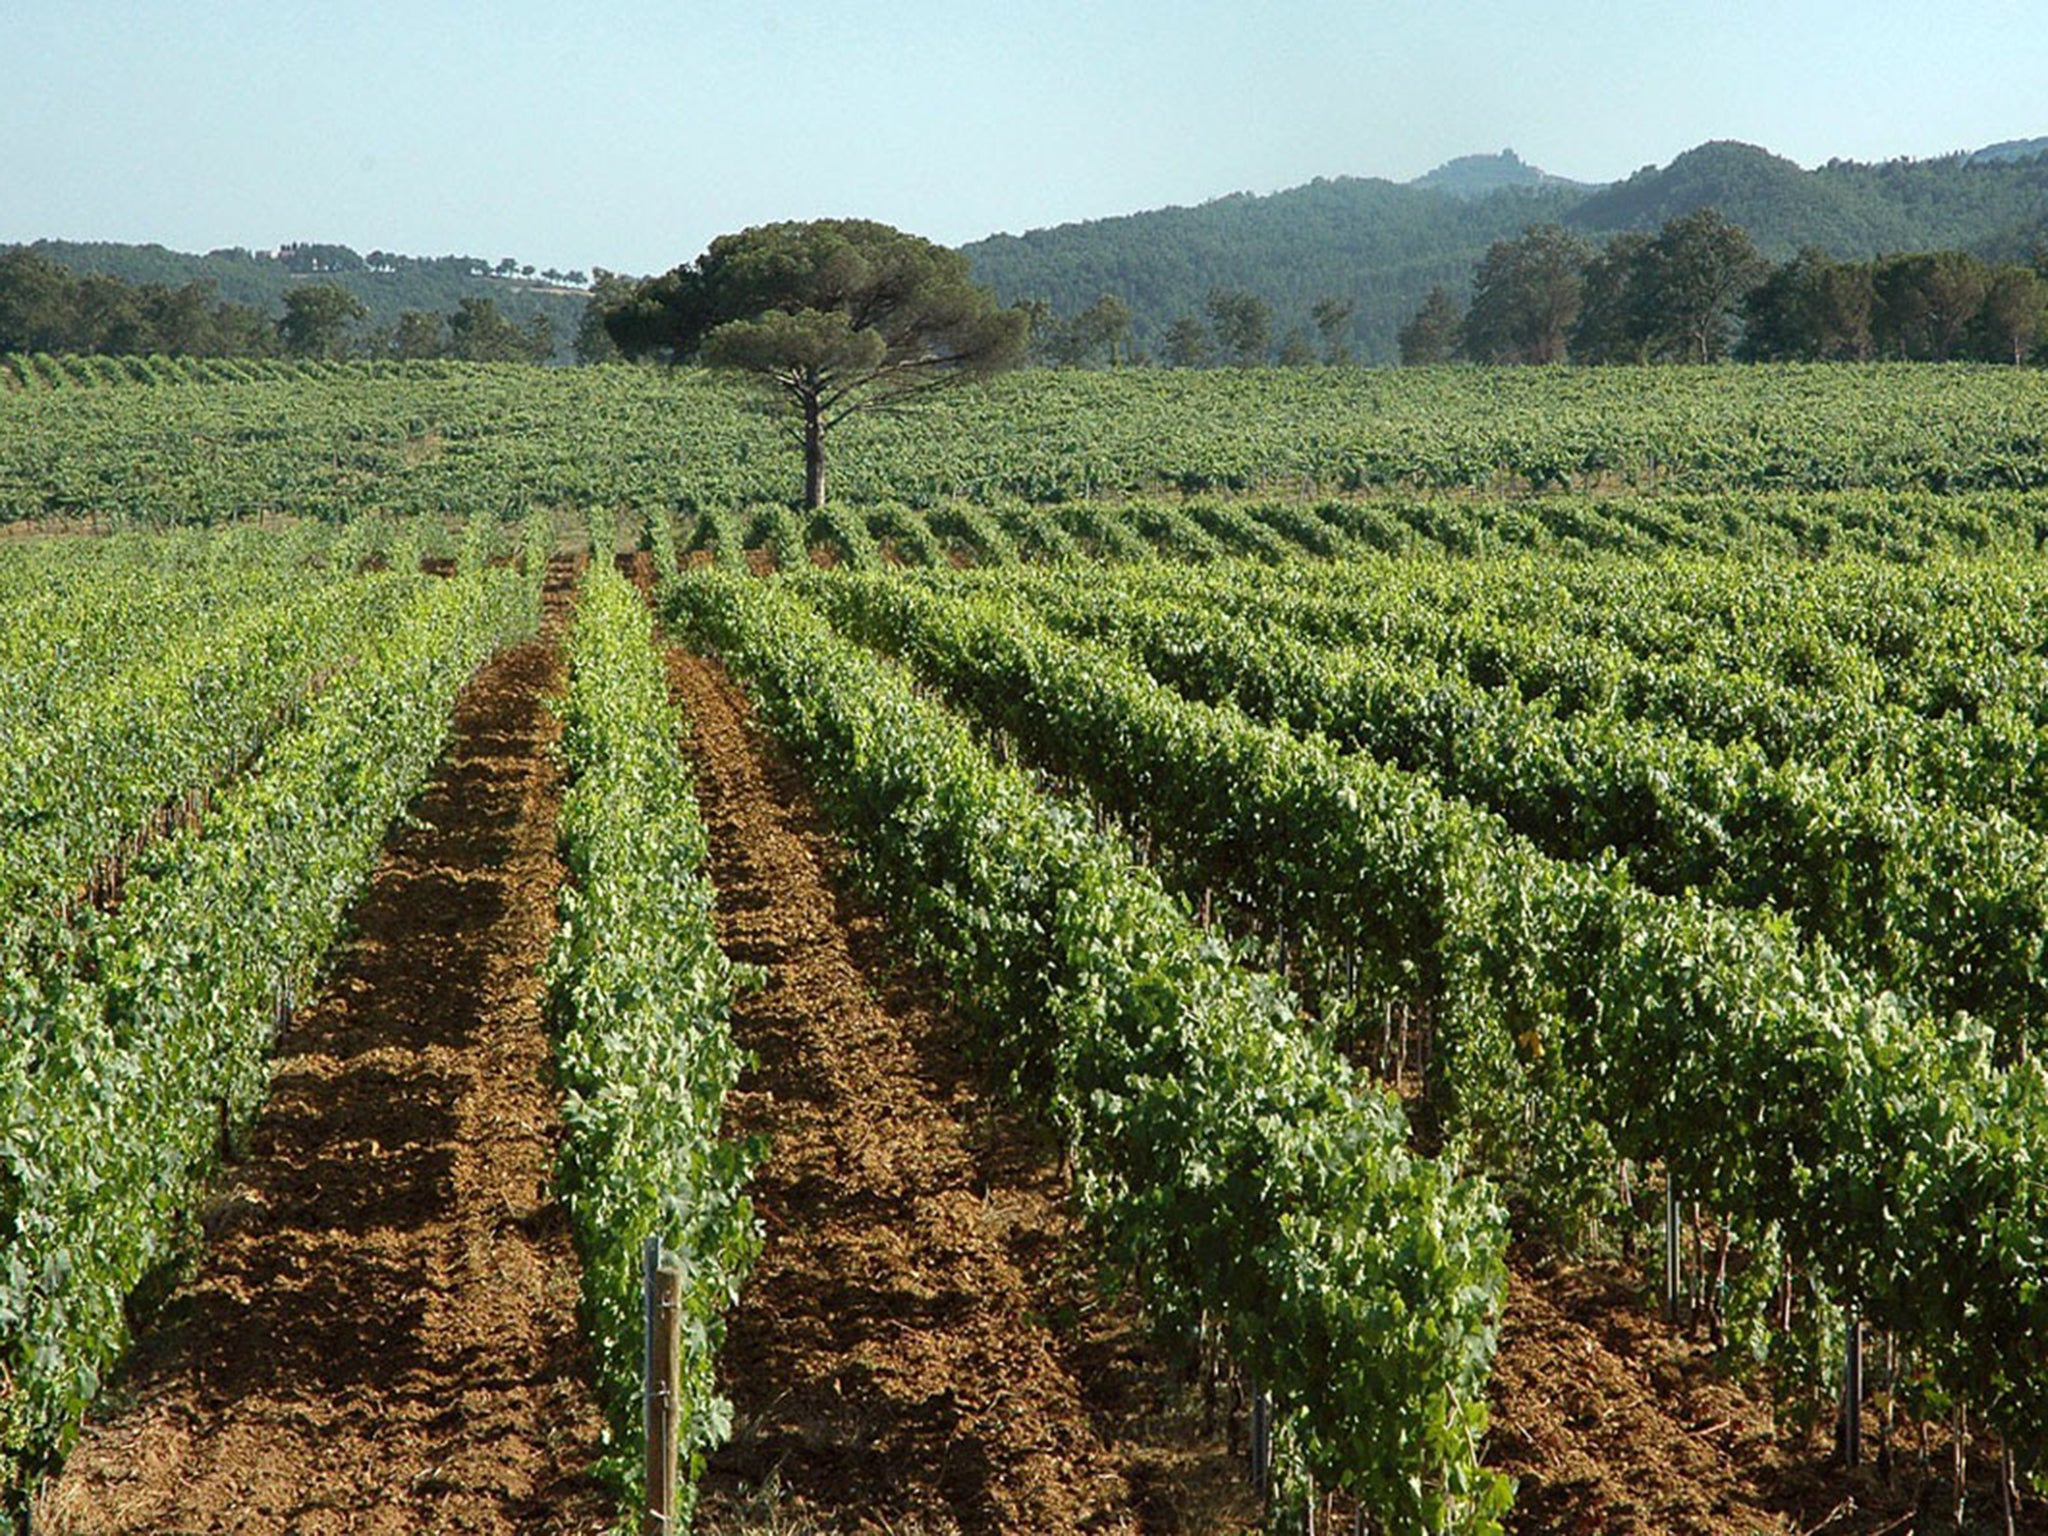 The Fattoria Casabianca vineyard, near Siena, will trace
its grapes throughout every step of the wine-making
process to ensure a vegan product